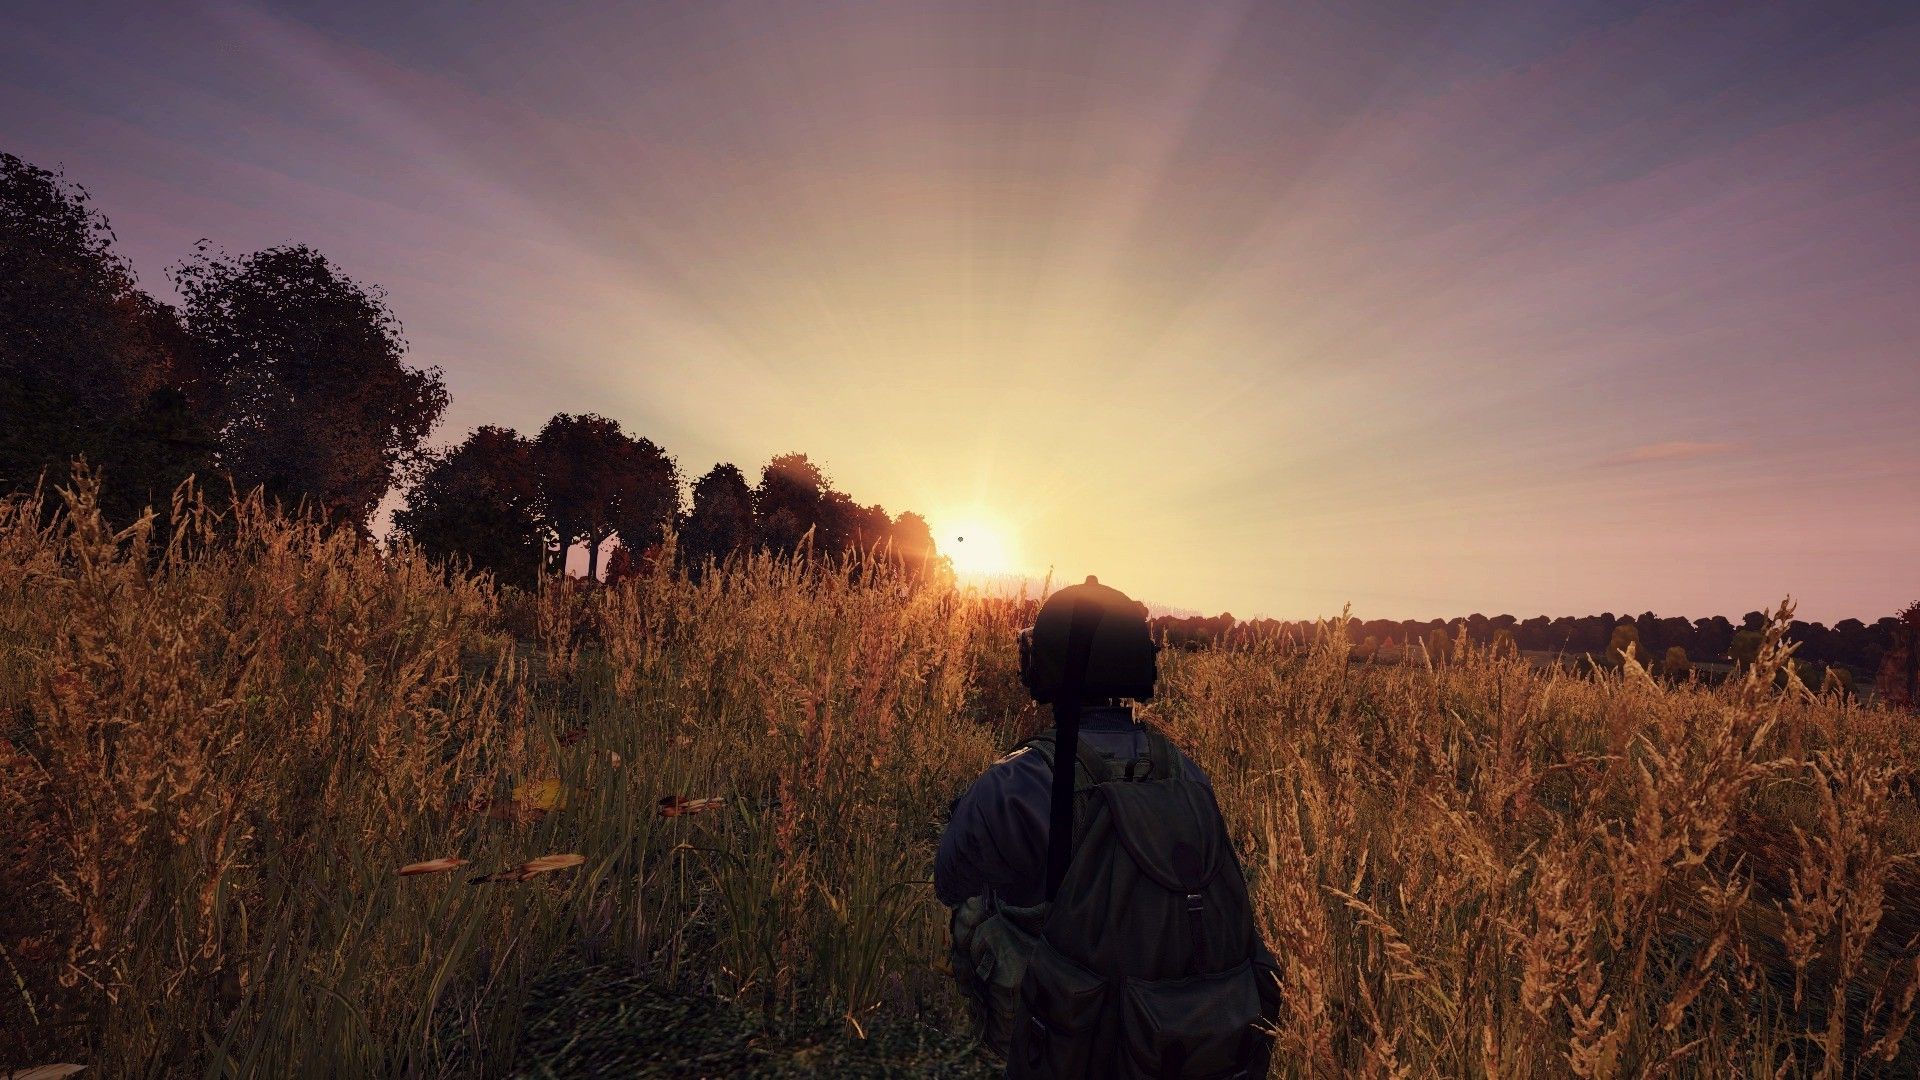 dayz wallpapers